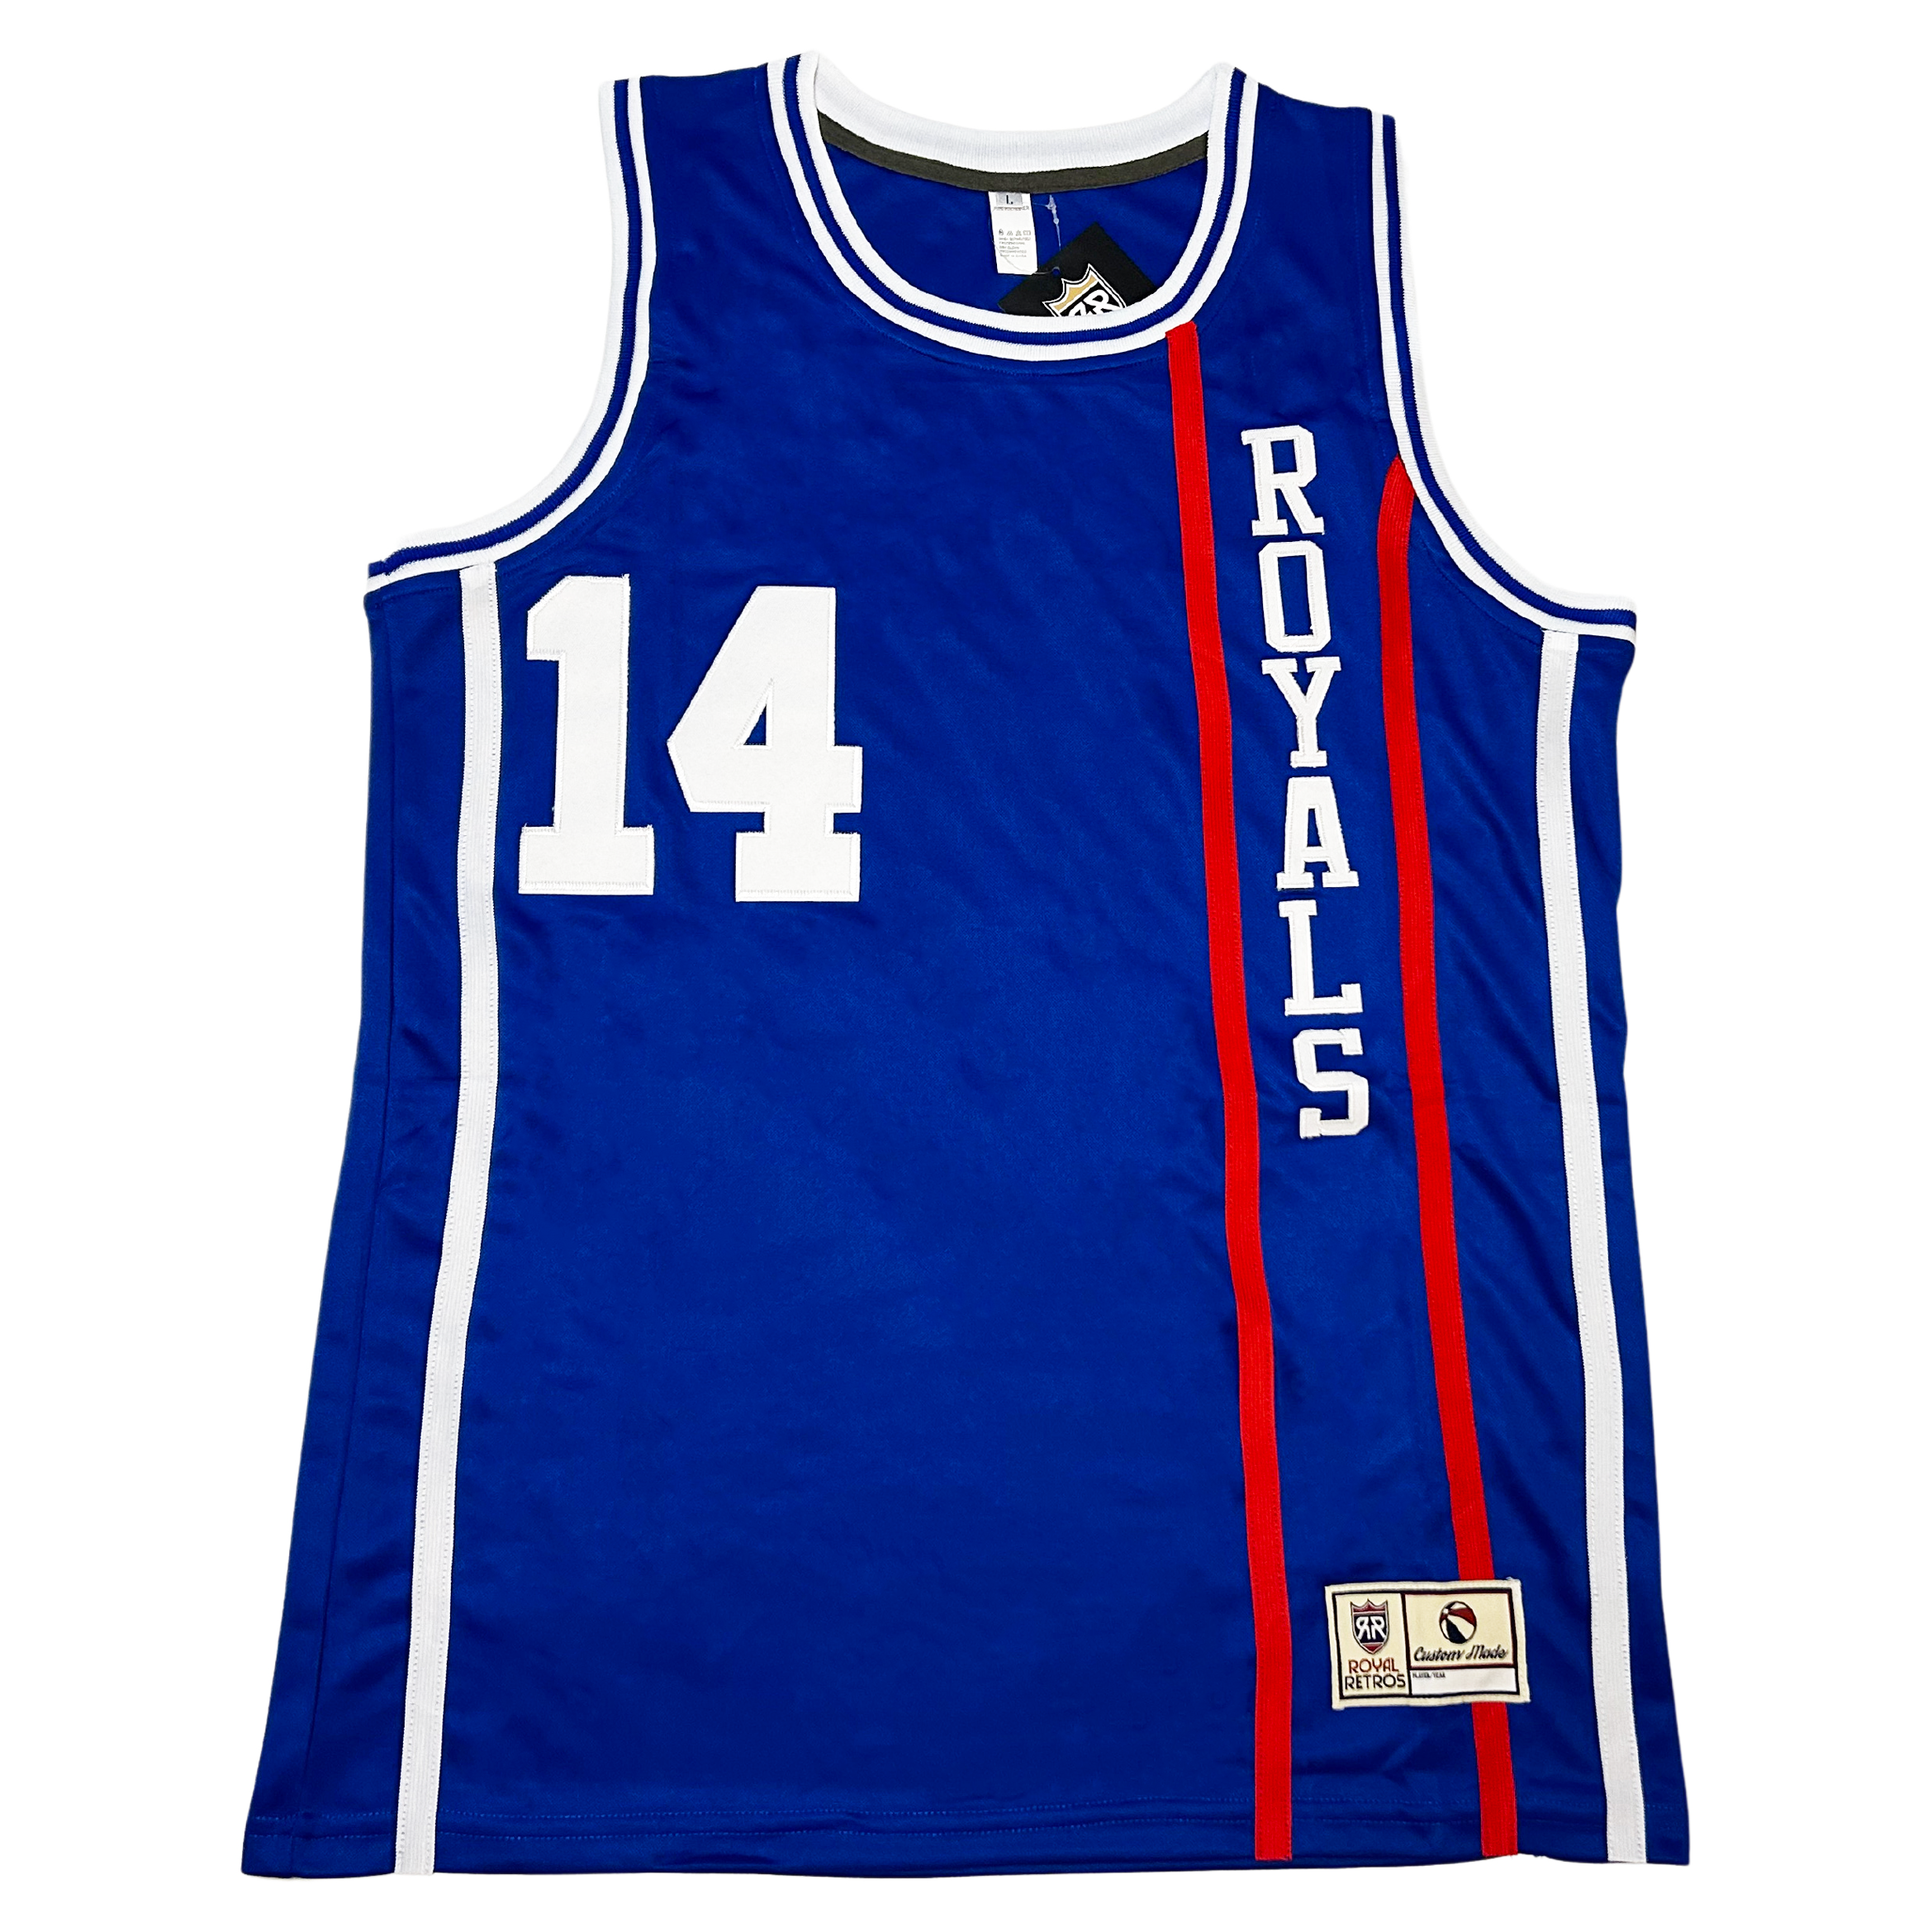 Cinci Royals-style Kings jersey with beam : r/kings